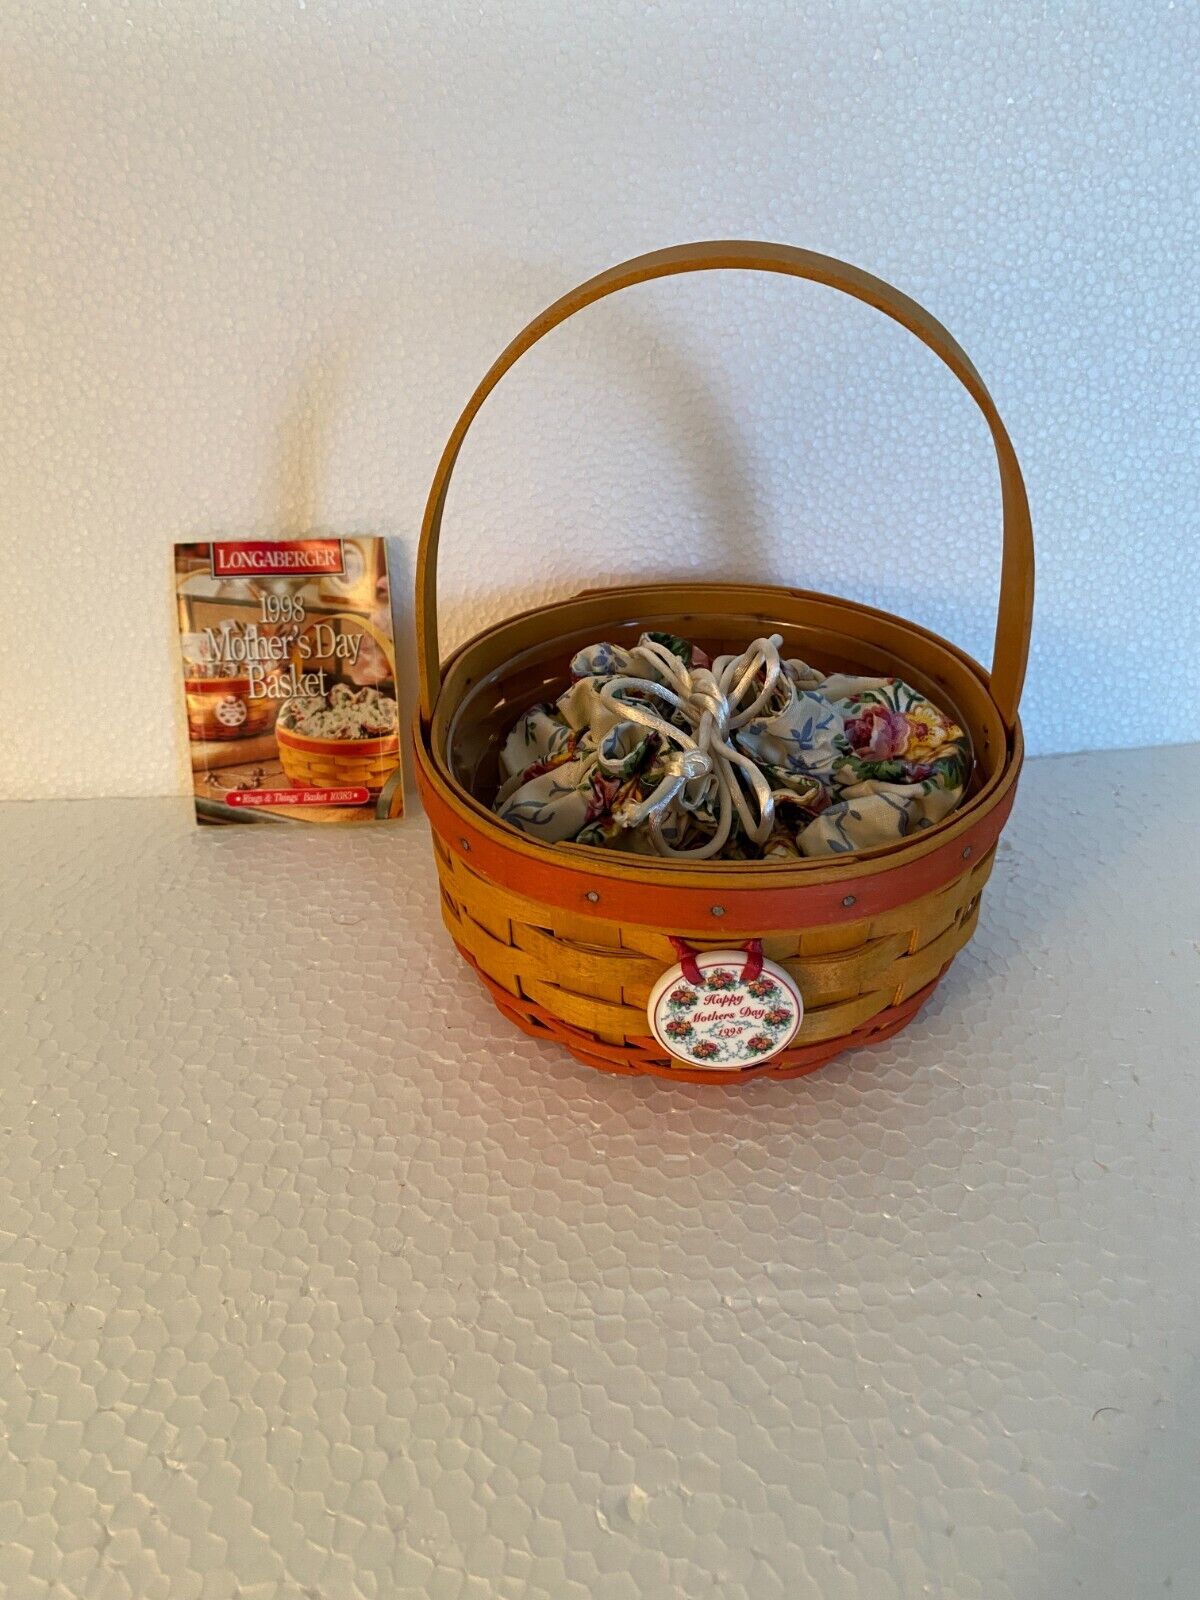 Longaberger 1998 Mothers Day Rings & Things Basket Tie-On Prot. & Jewelry Pouch